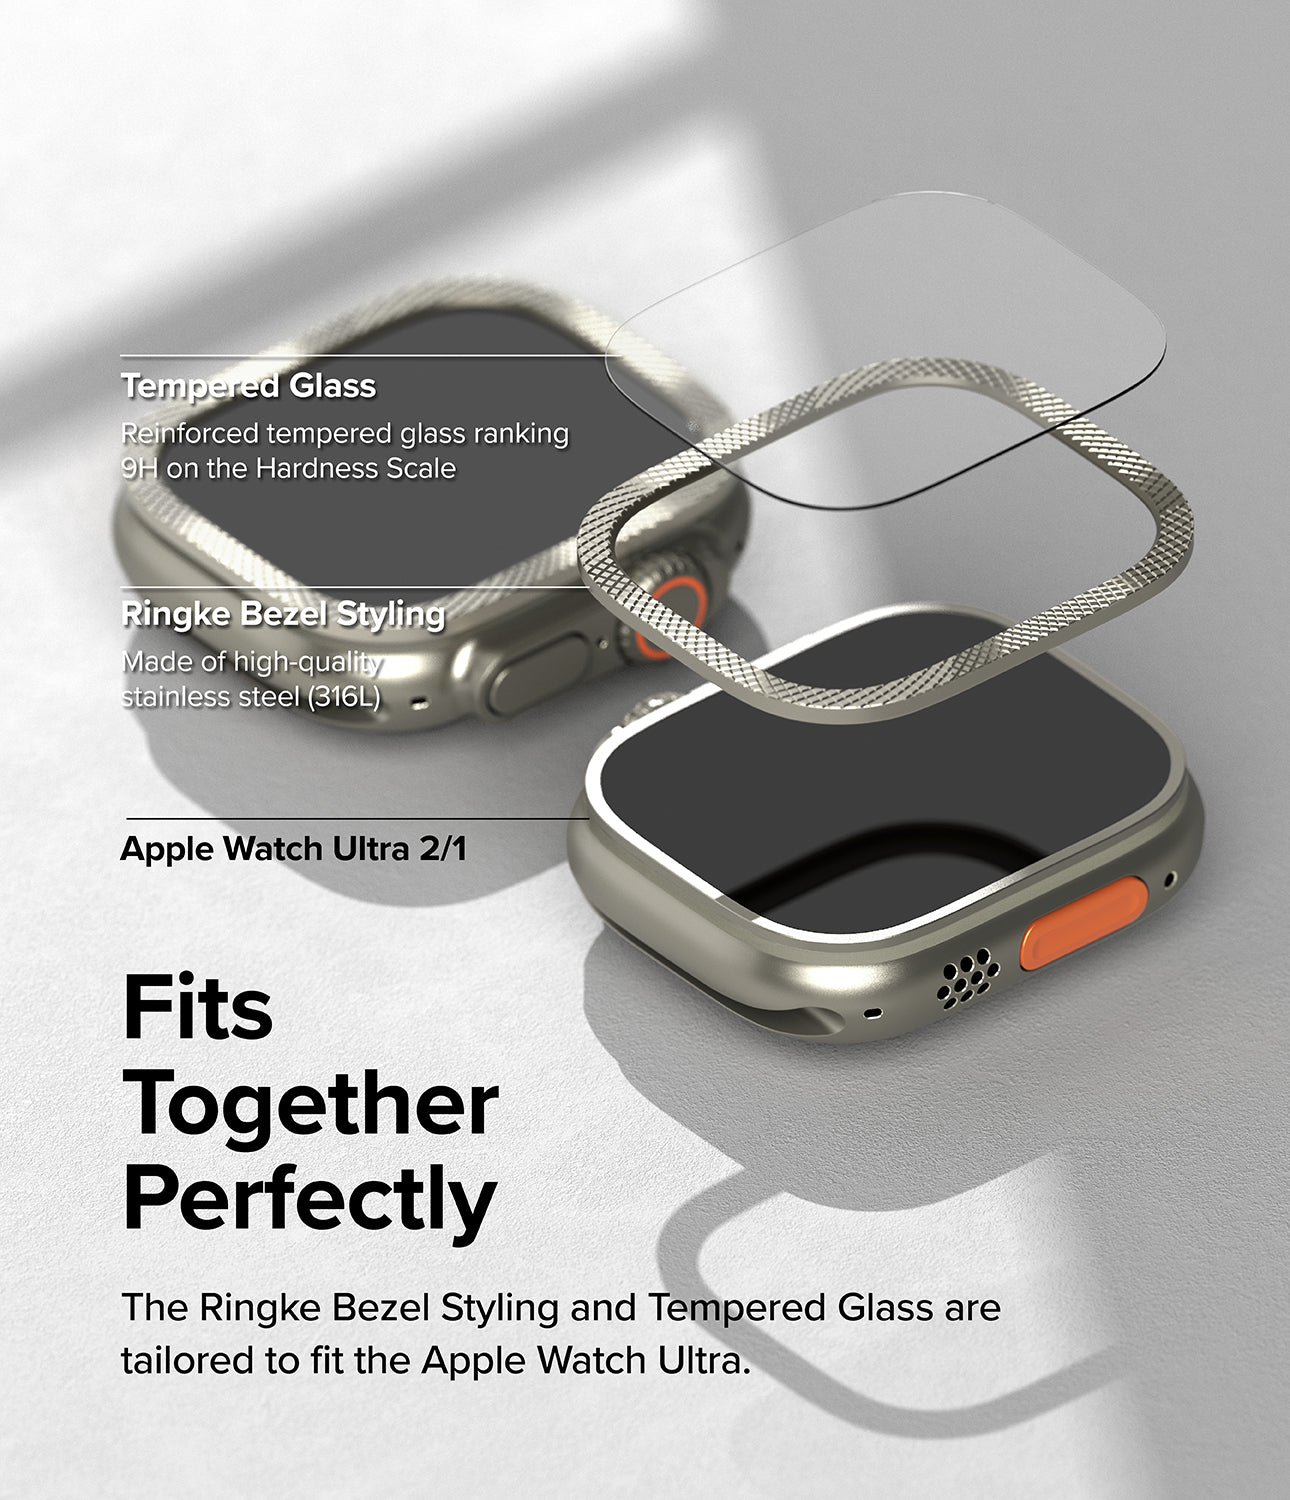 Apple Watch Ultra 2 / 1 | Glass + Bezel Styling 49-48 - Fits Together Perfectly. The Ringke Bezel Styling and Tempered Glass are tailored to fit the Apple Watch Ultra.